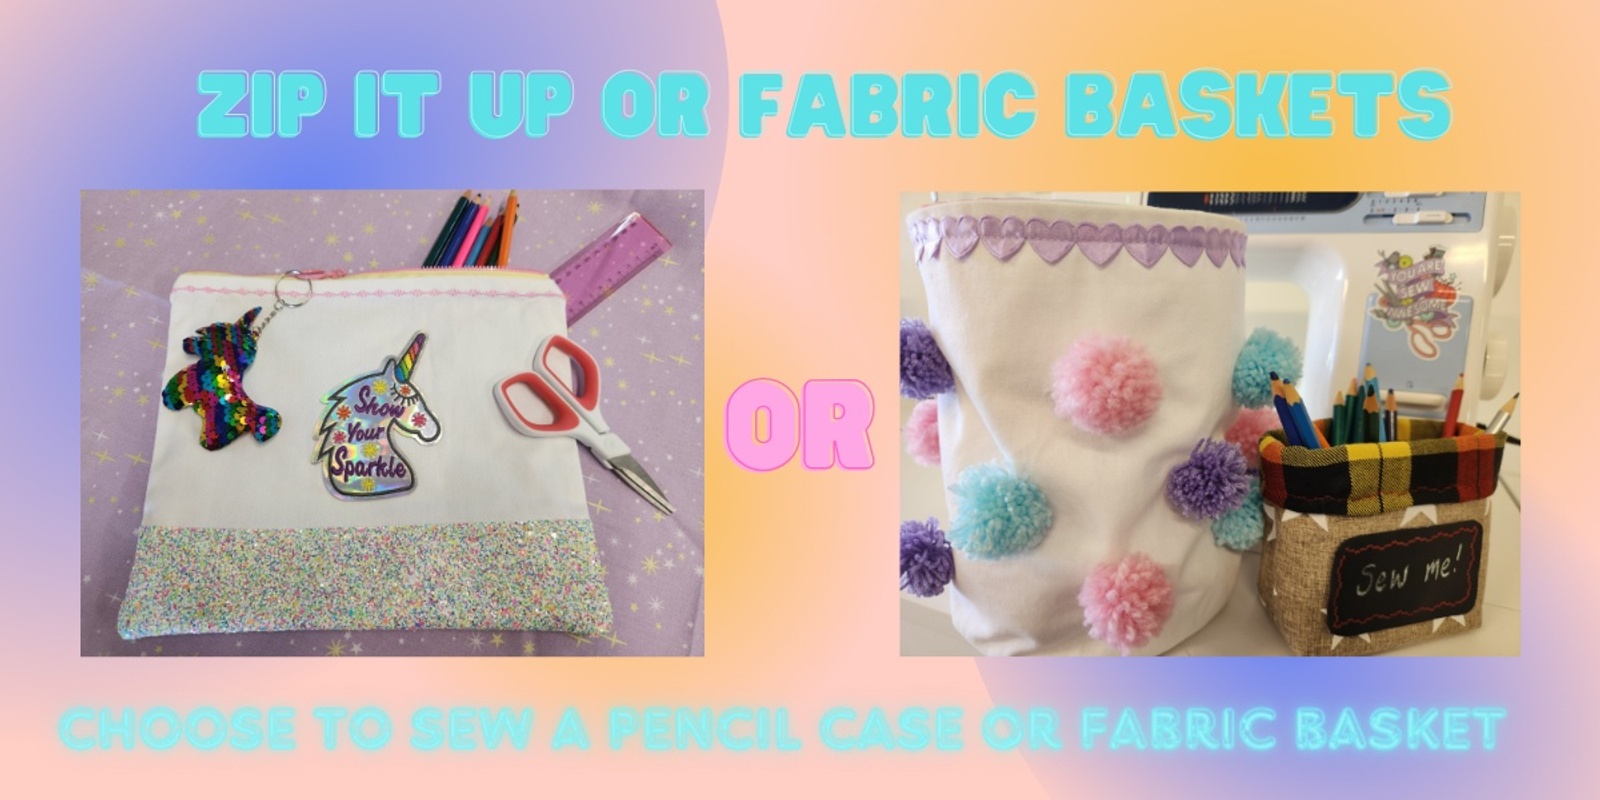 Banner image for Zip It Up or Fabric Baskets Sewing Workshop